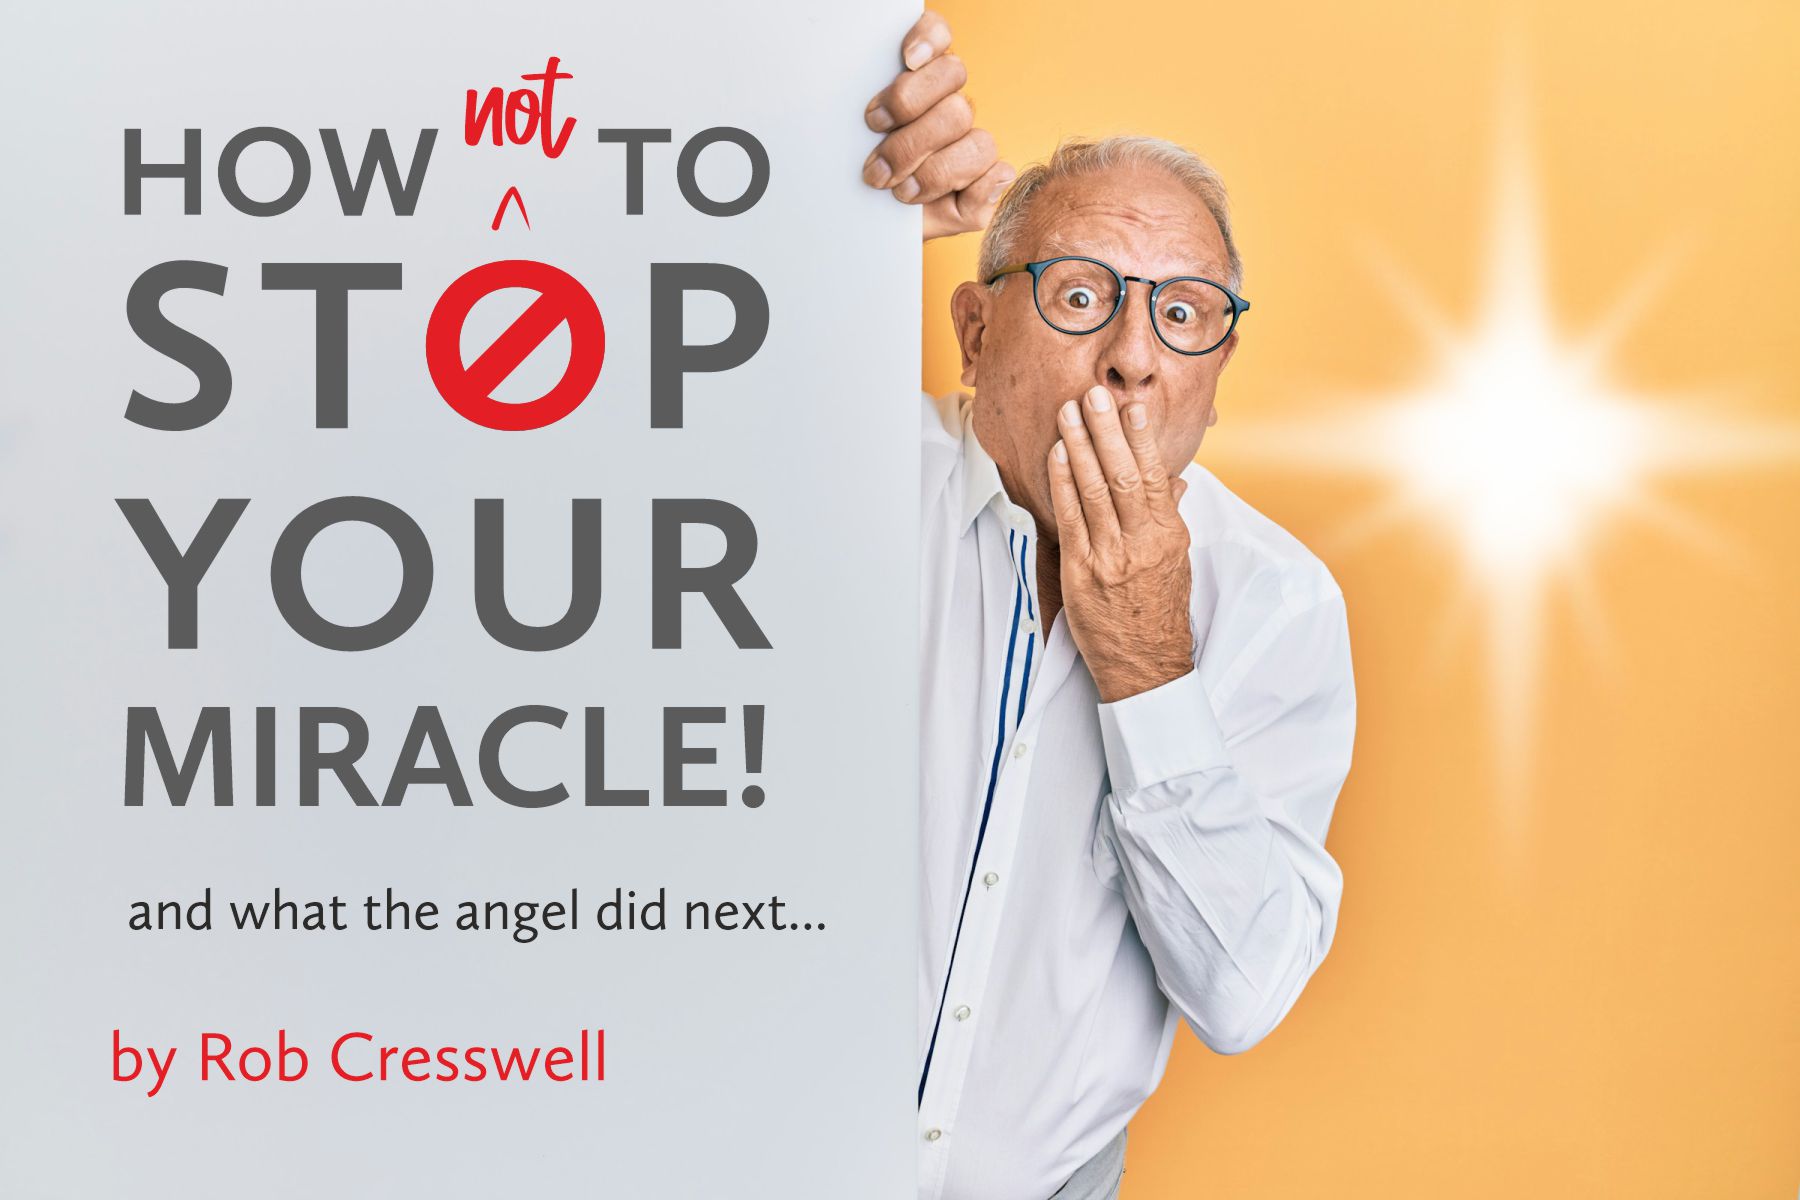 How not to stop your miracle